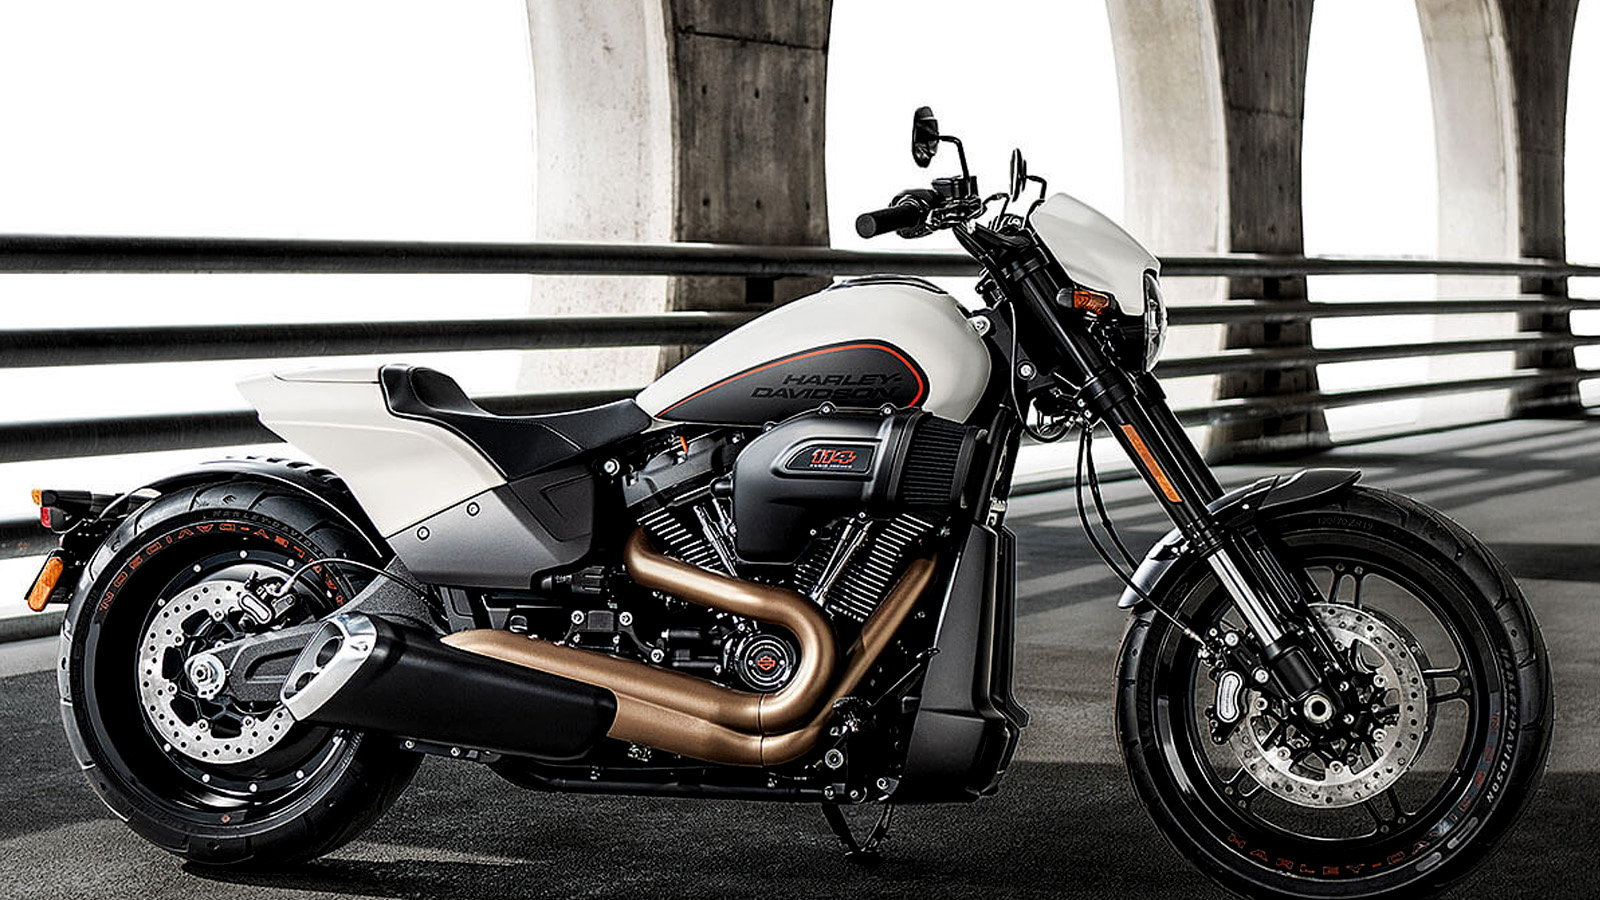 The 2019 Harley Davidson FXDR 114 is a New Breed of Softail | Hdforums